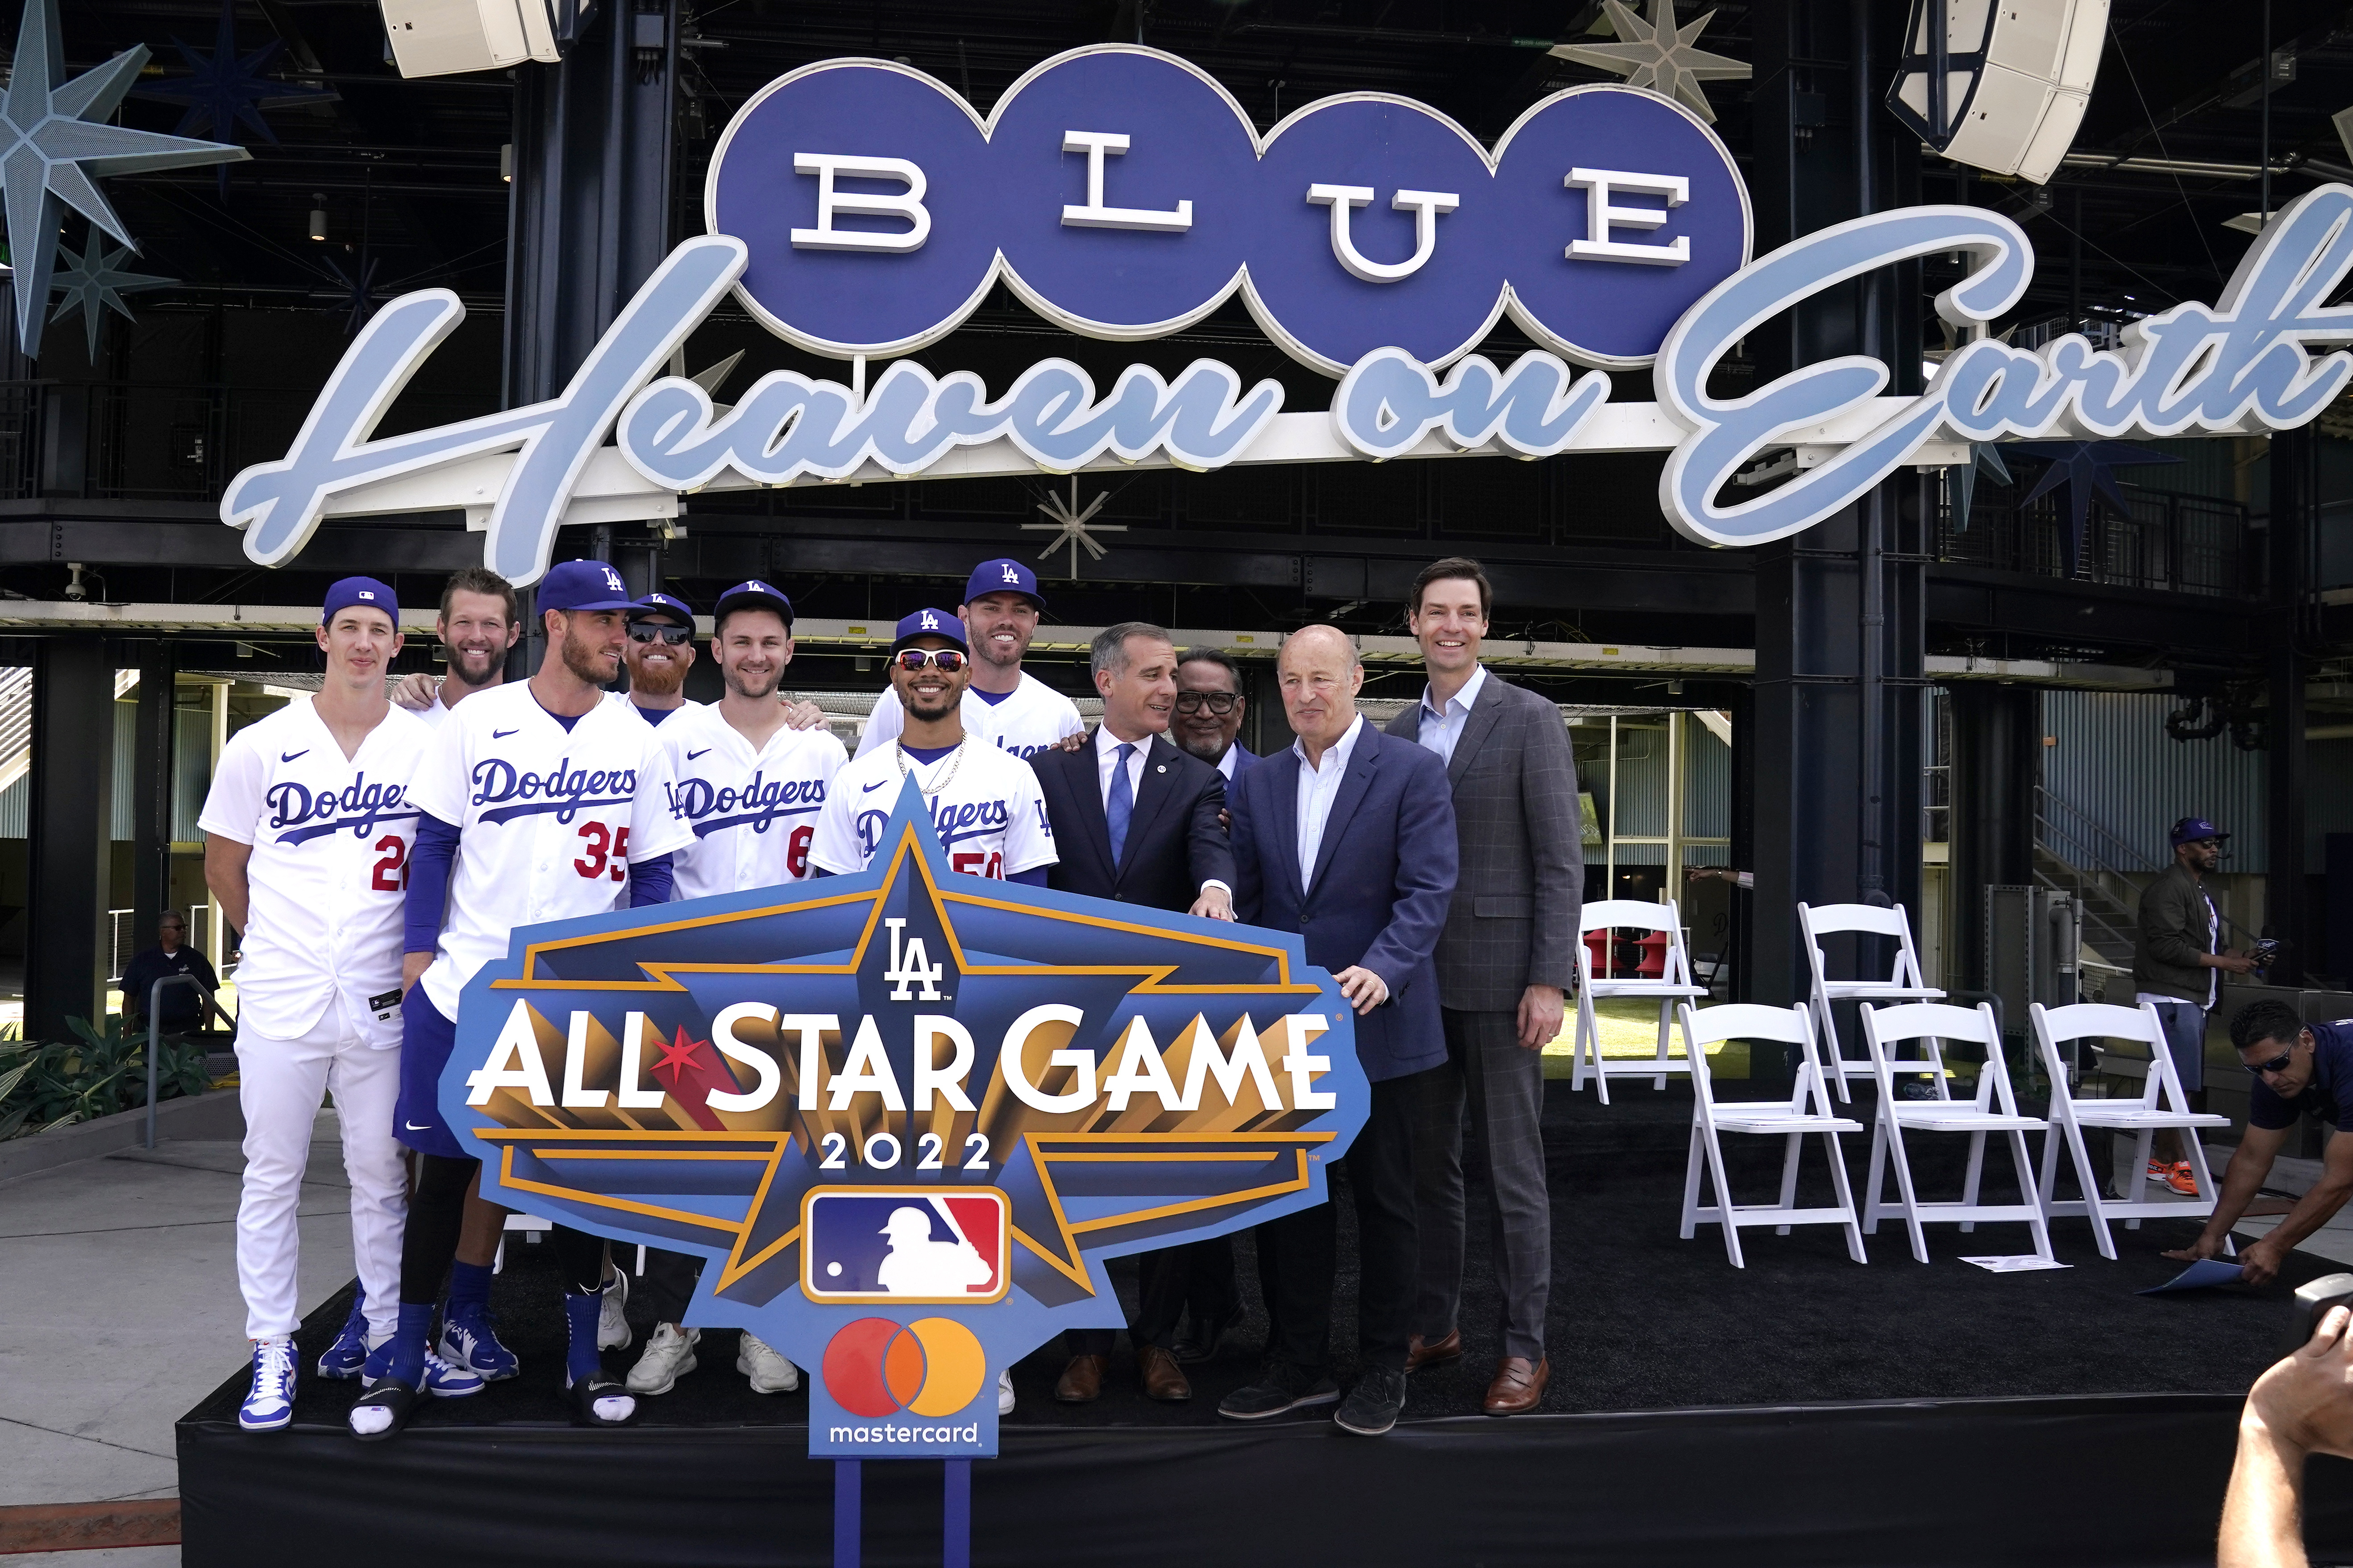 MLB All-Star Game 2023: Here are the AL, NL starters – NBC Sports